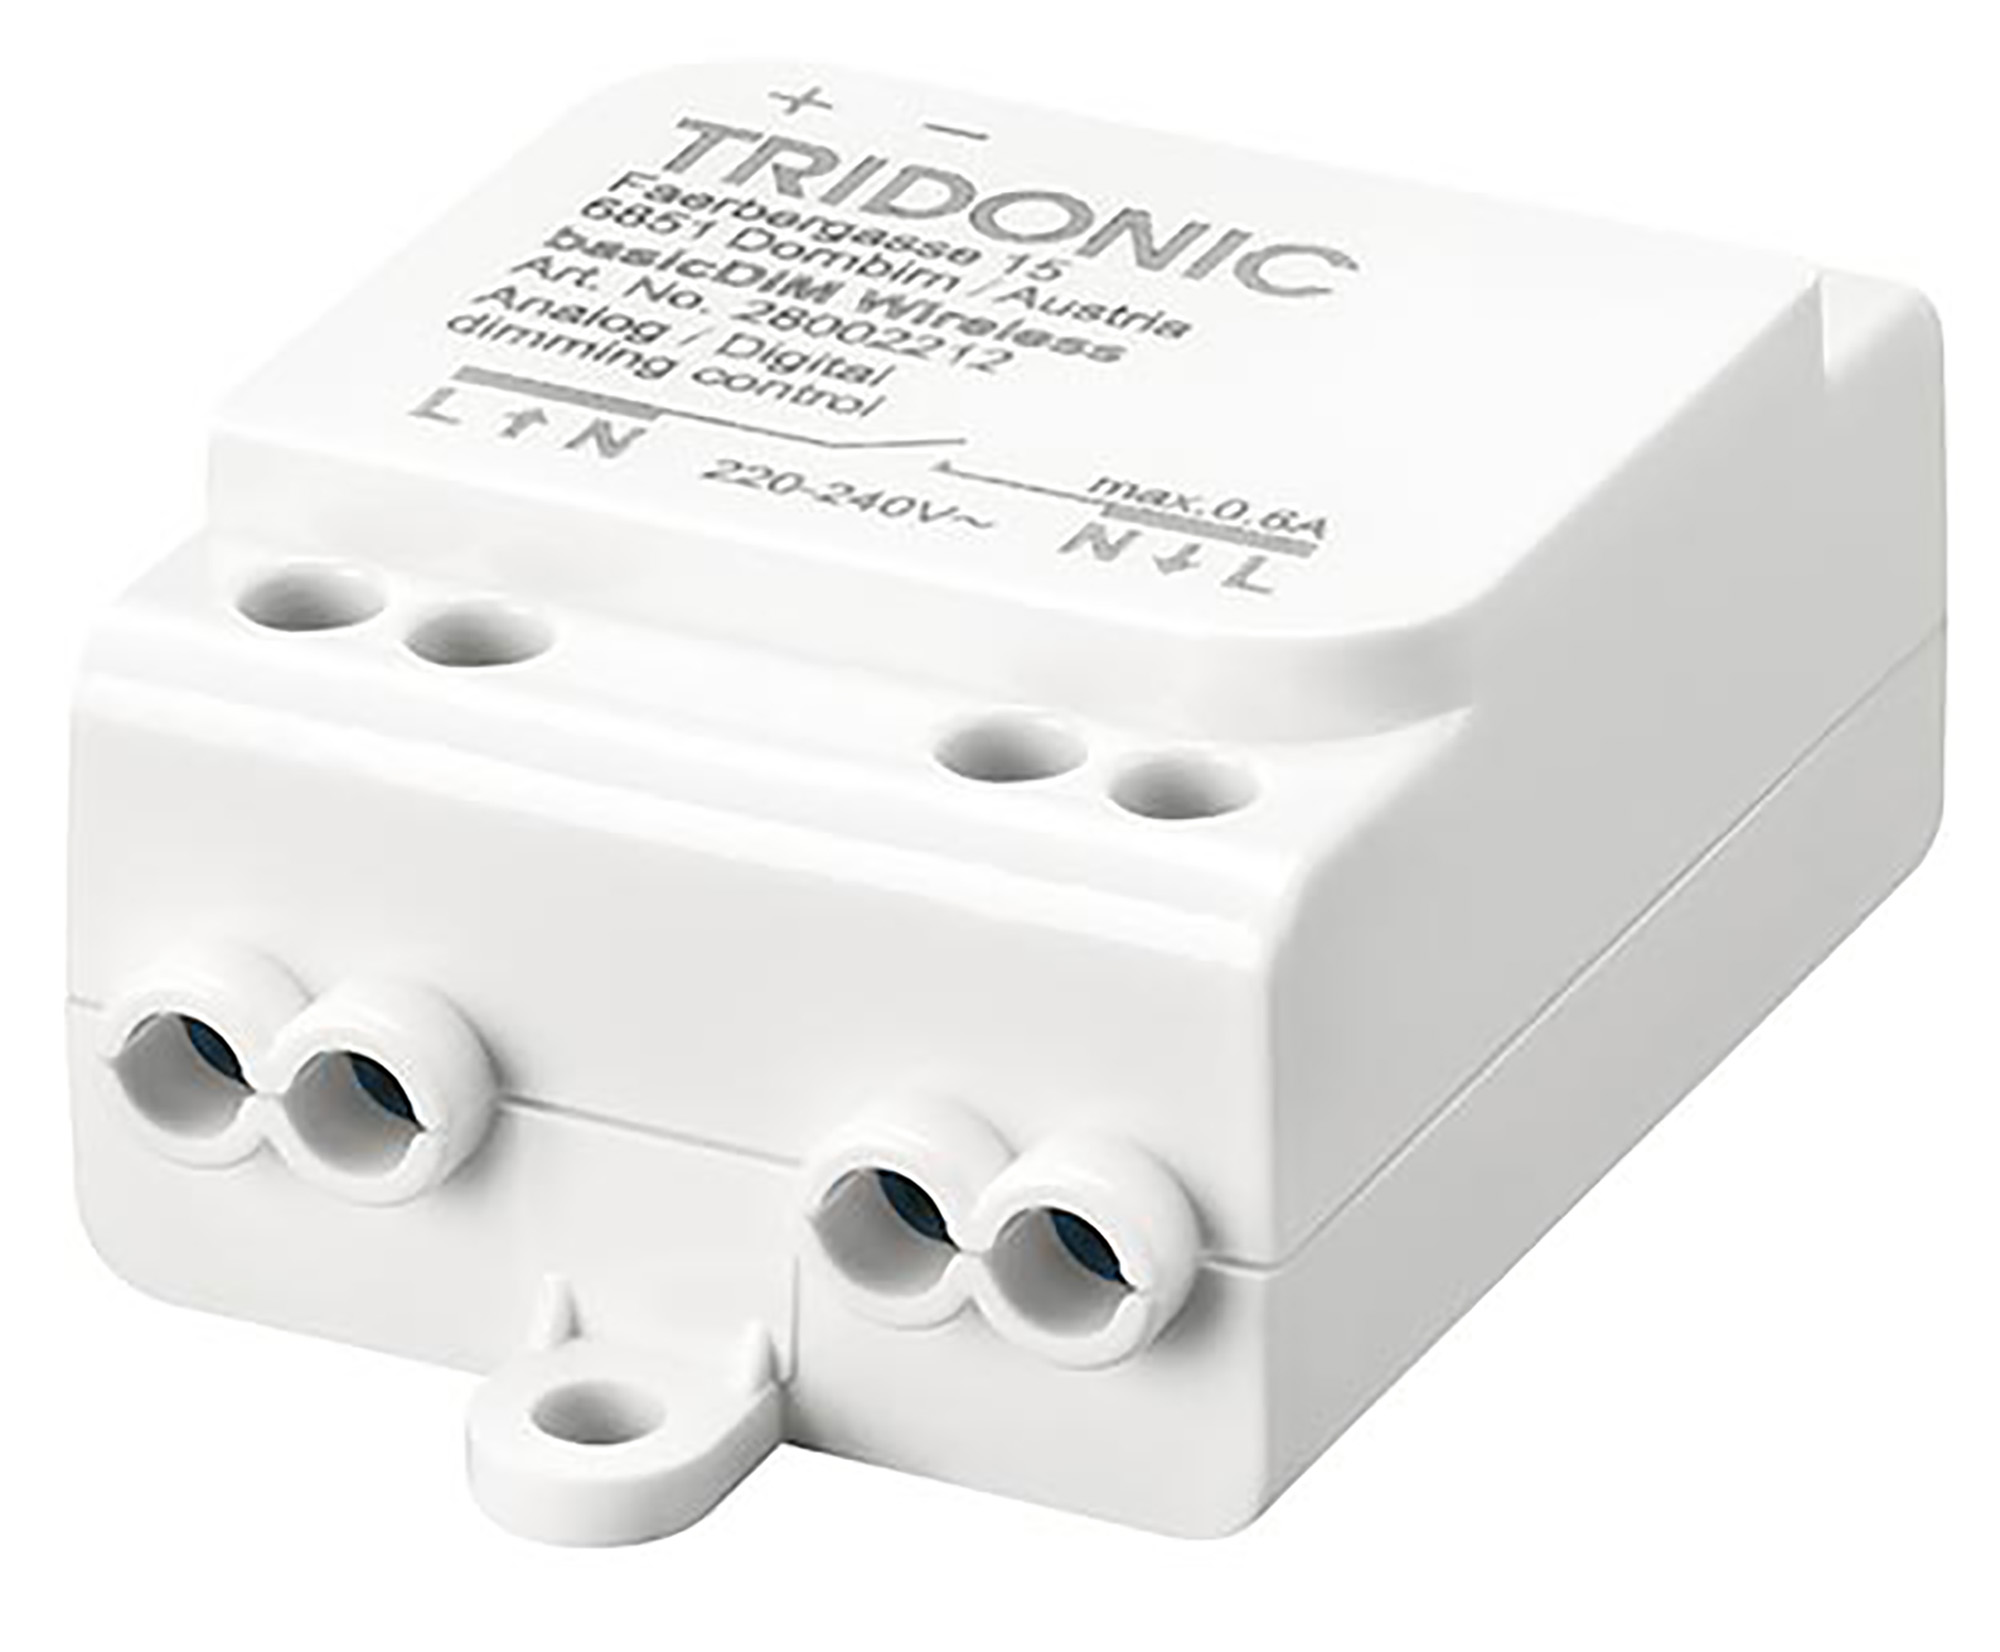 28002212  basicDIM Wireless module, 2.4 – 2.483 GHz Radio transceiver operating frequencies, Rated supply voltage 220 – 240 Vac, Configurable analog / digital output 0-10 V / 1-10 V and DALI, P20.